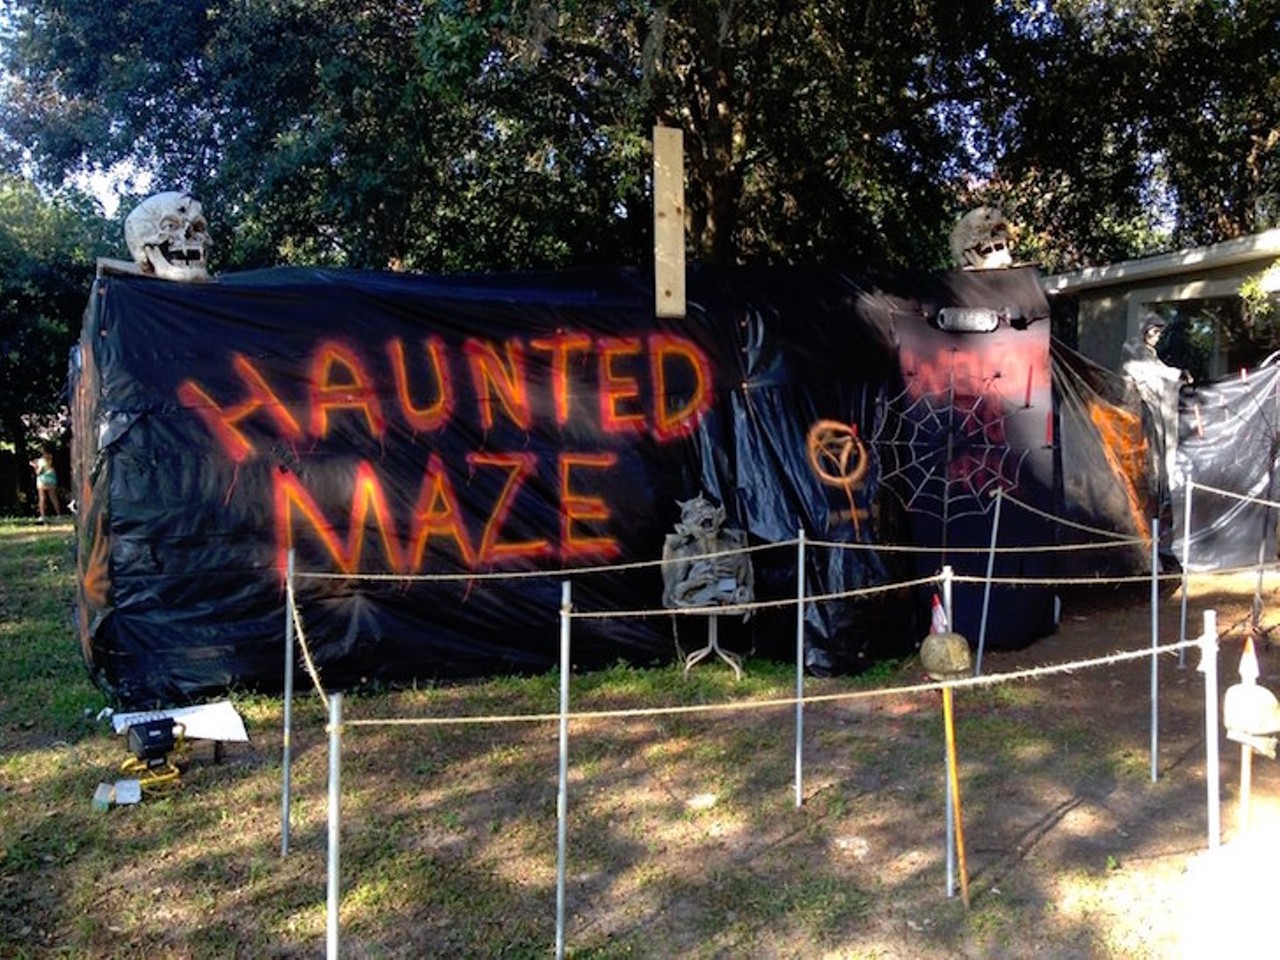 
Orlando Haunted Maze
3902 Calloway Drive, 407-456-9999
Friday frights and Saturday scares are in no shortage at Orlando&#146;s Haunted Maze during the entire month of October. Children 11 and under get in for $5, those 12 and older cost $10. If you can&#146;t make it to a weekend date, try your escape on Oct. 30 or 31 instead. 
Photo via Orlando Haunted Maze/Facebook